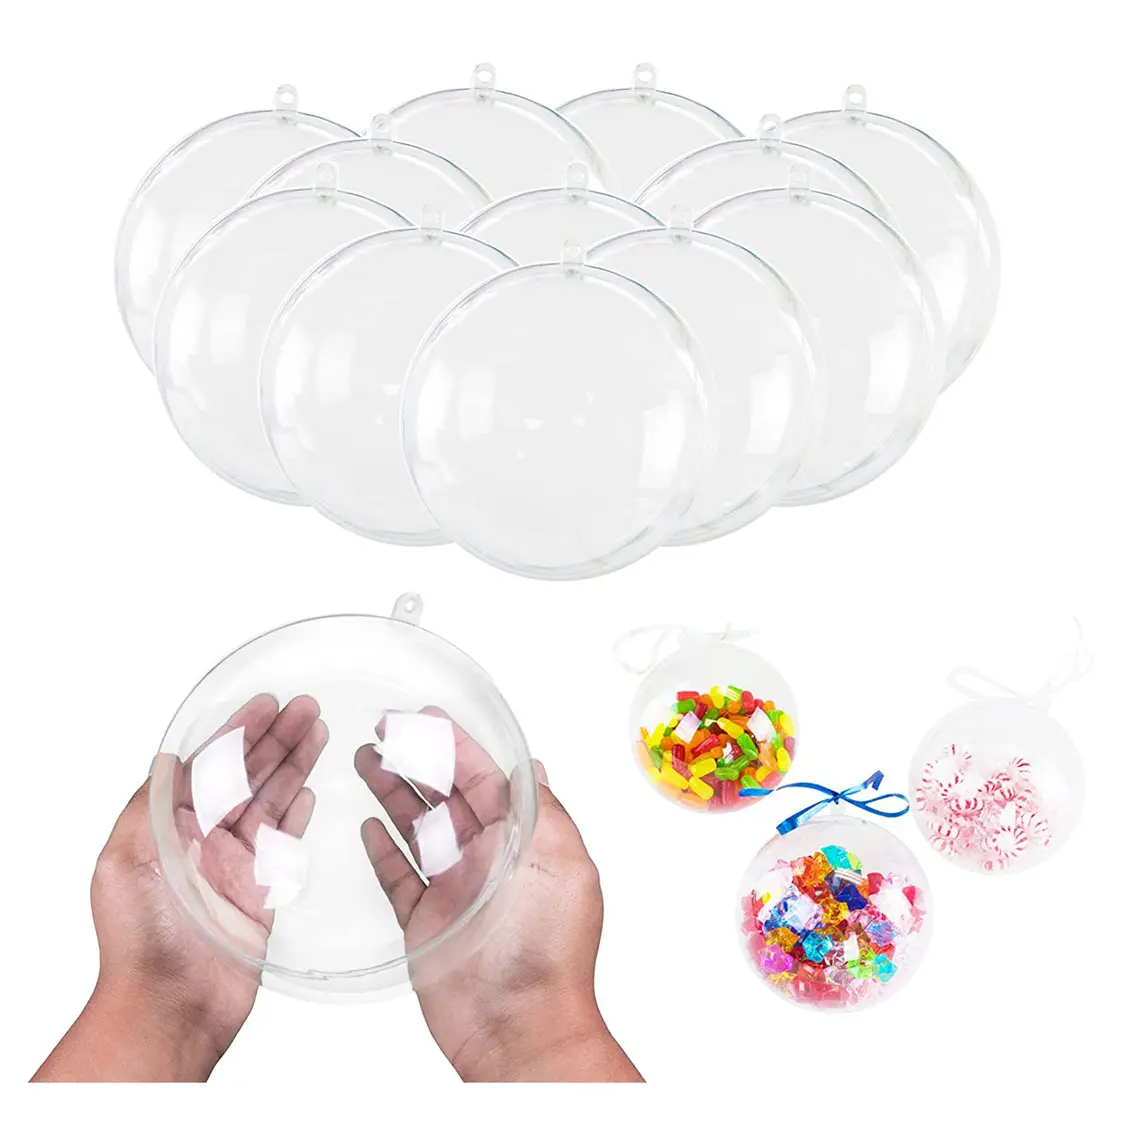 10cm Clear Plastic Fillable Ornaments Ball Christmas Transparent Ball Plastic Sphere Ornament for Xmas Tree